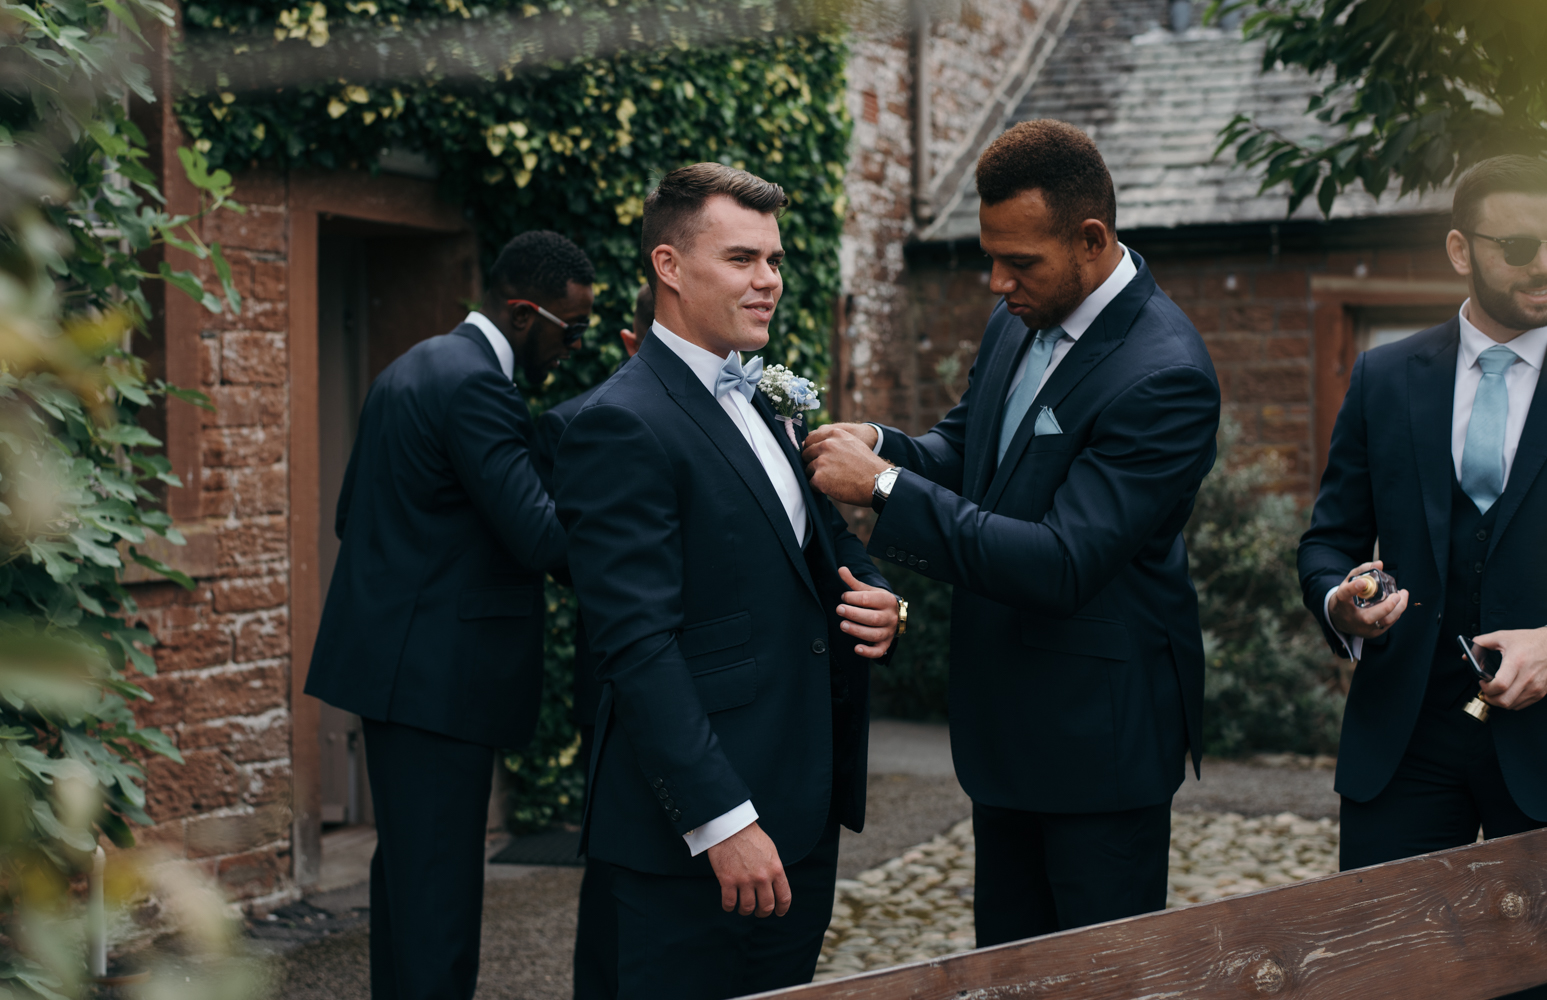 A groom getting some help with his button hole